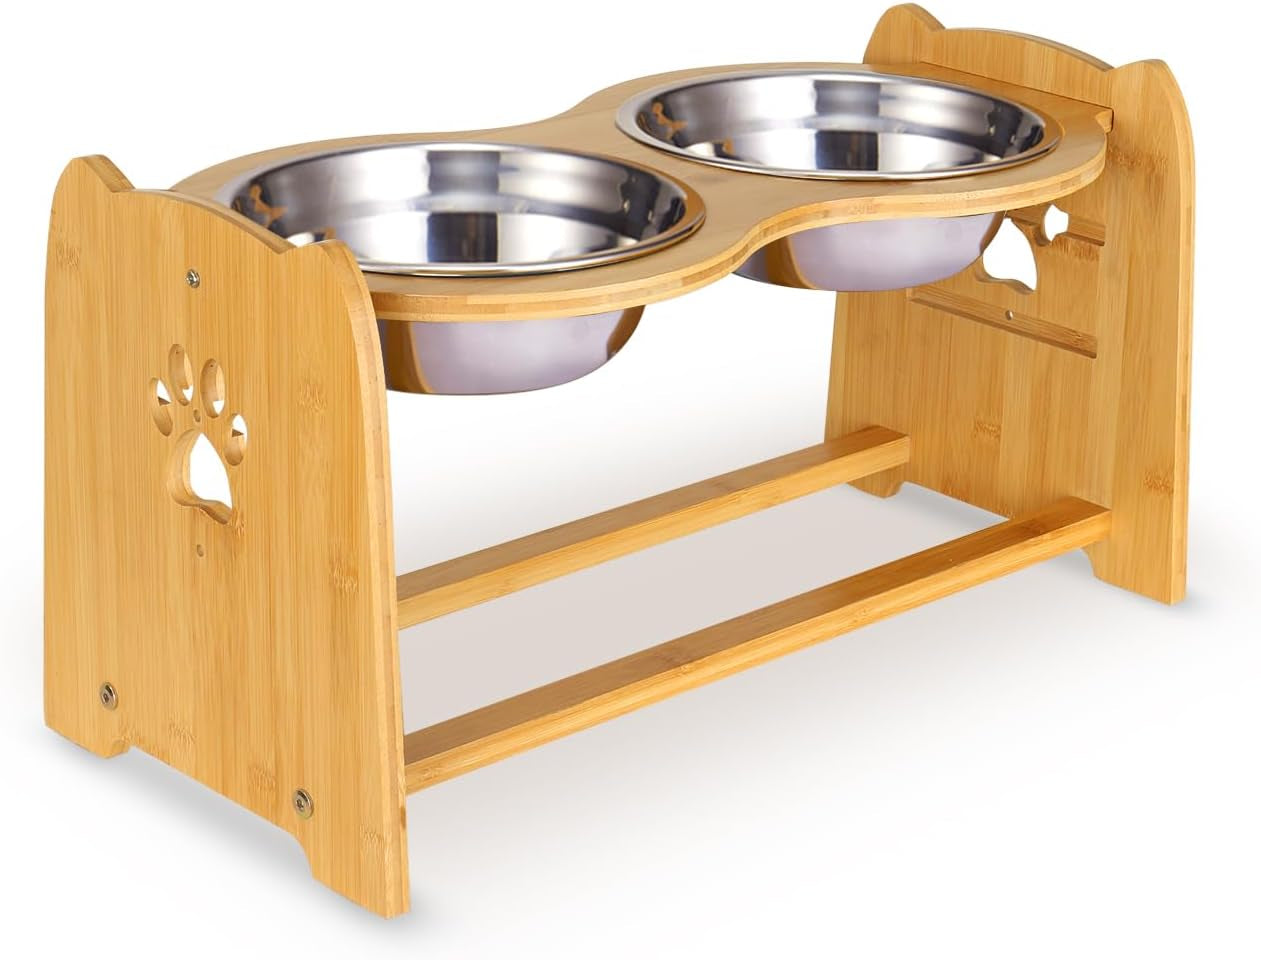 Elevated Dog Bowls for Cats and Dogs, Adjustable Bamboo Raised Dog Bowls for Large Dog, Food and Water Stand Feeder with 2 Stainless Steel Bowls anti Slip Feet (Height 5.1" to 7.5" to 10")…